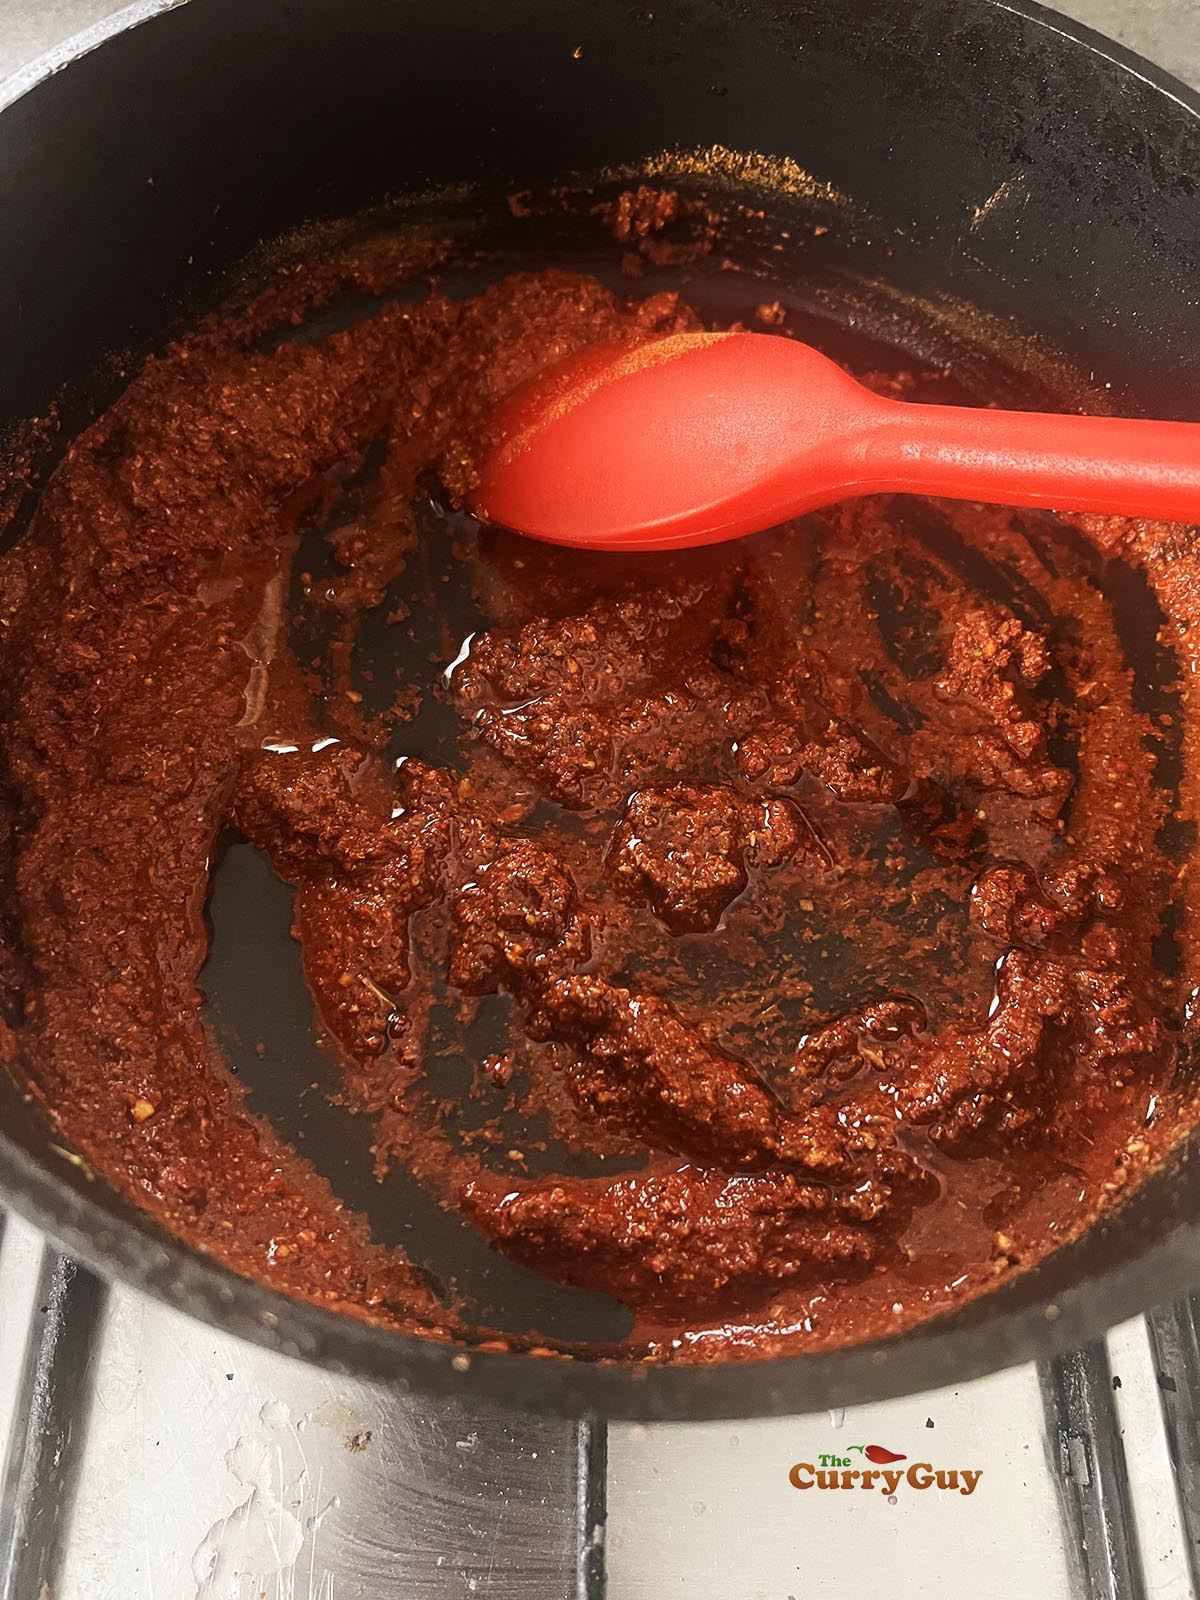 Adding the oil and stirring it into the water and tandoori masala powder.